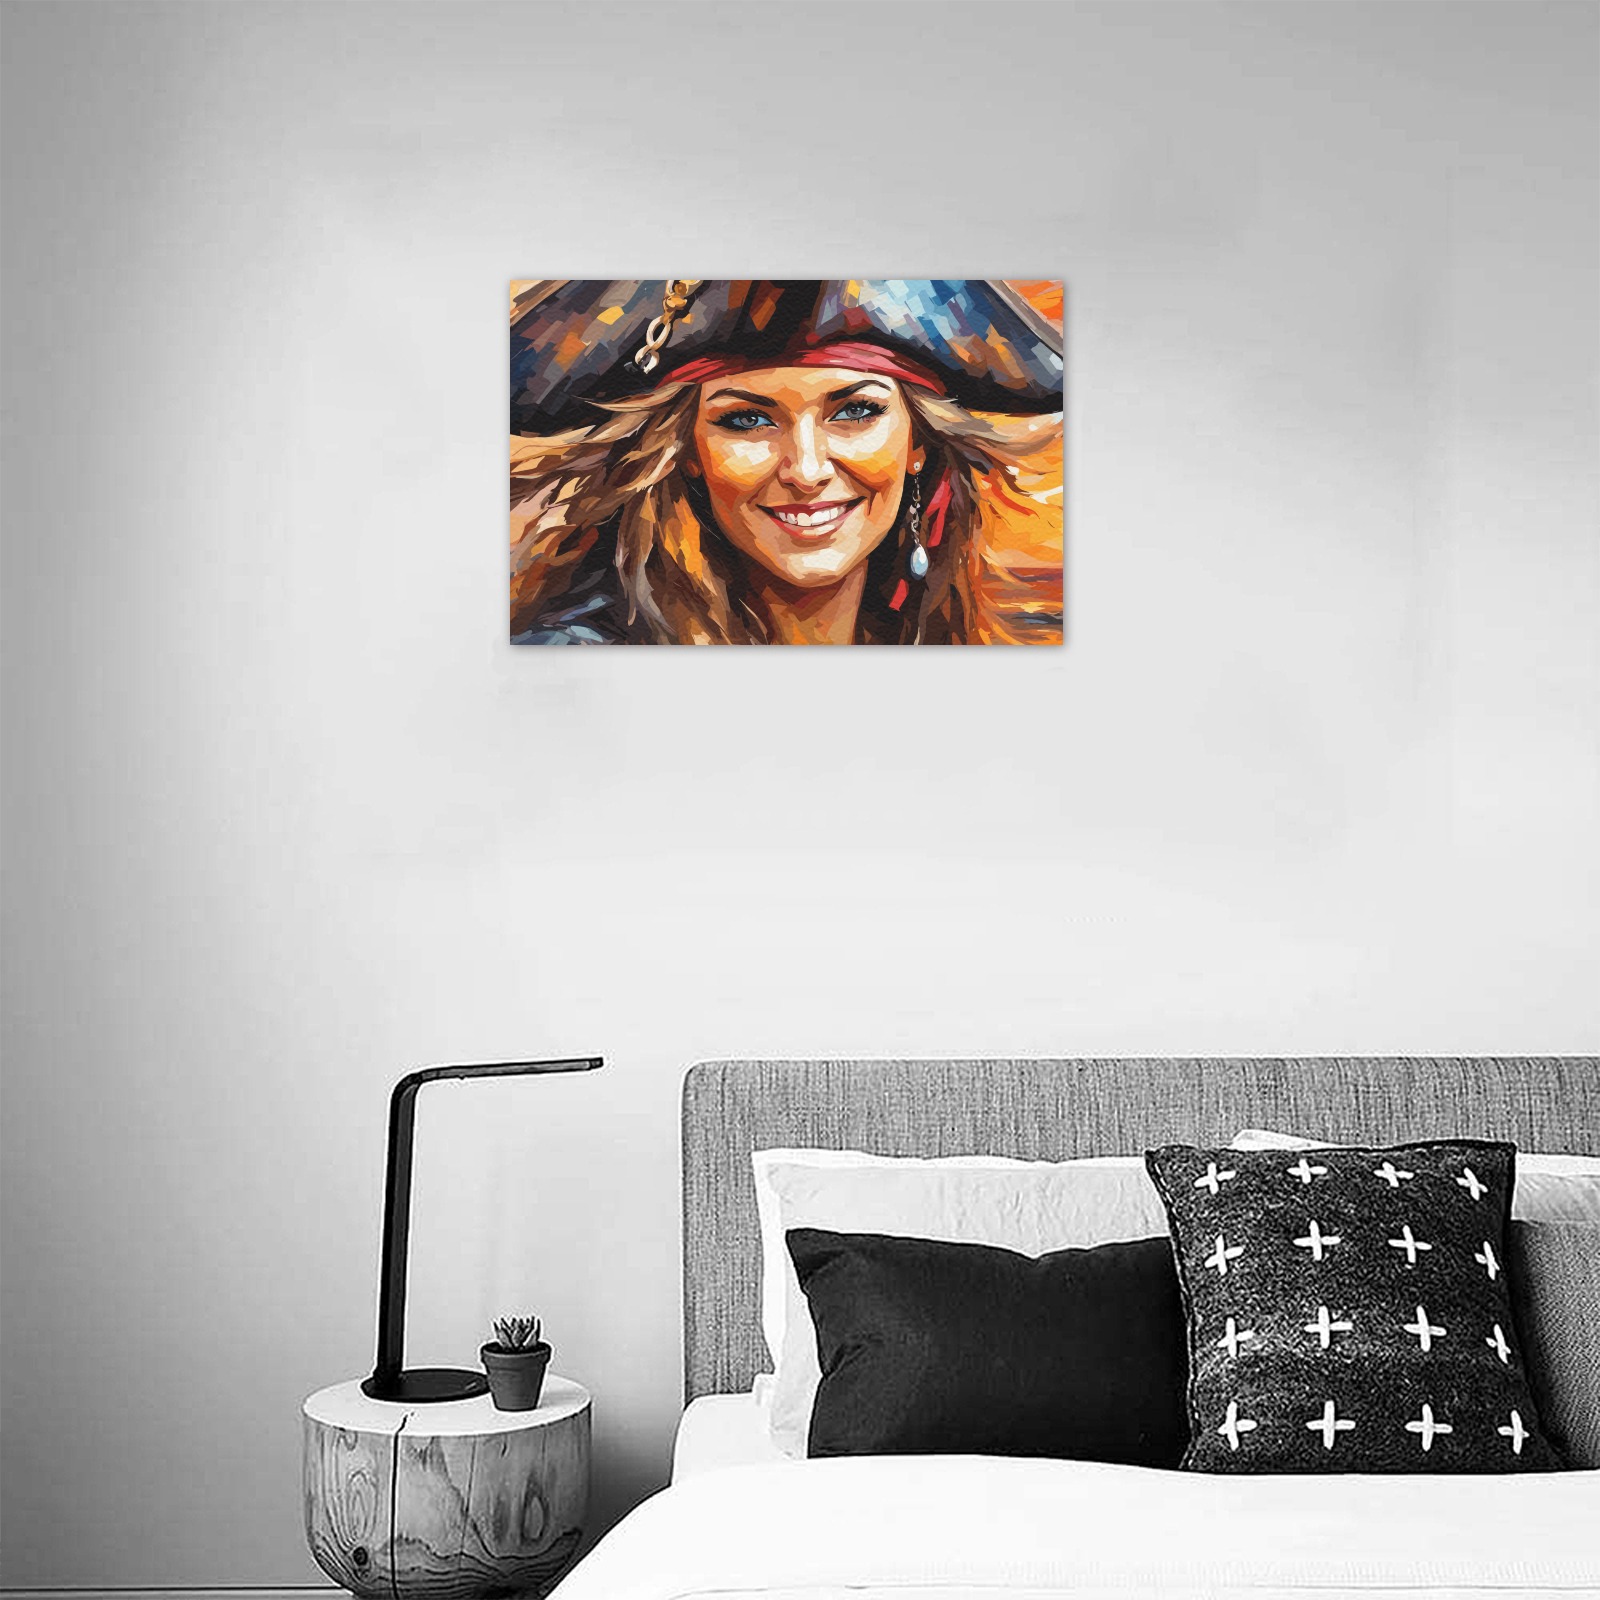 Charming adorable pirate lady at peaceful sunset. Upgraded Canvas Print 18"x12"